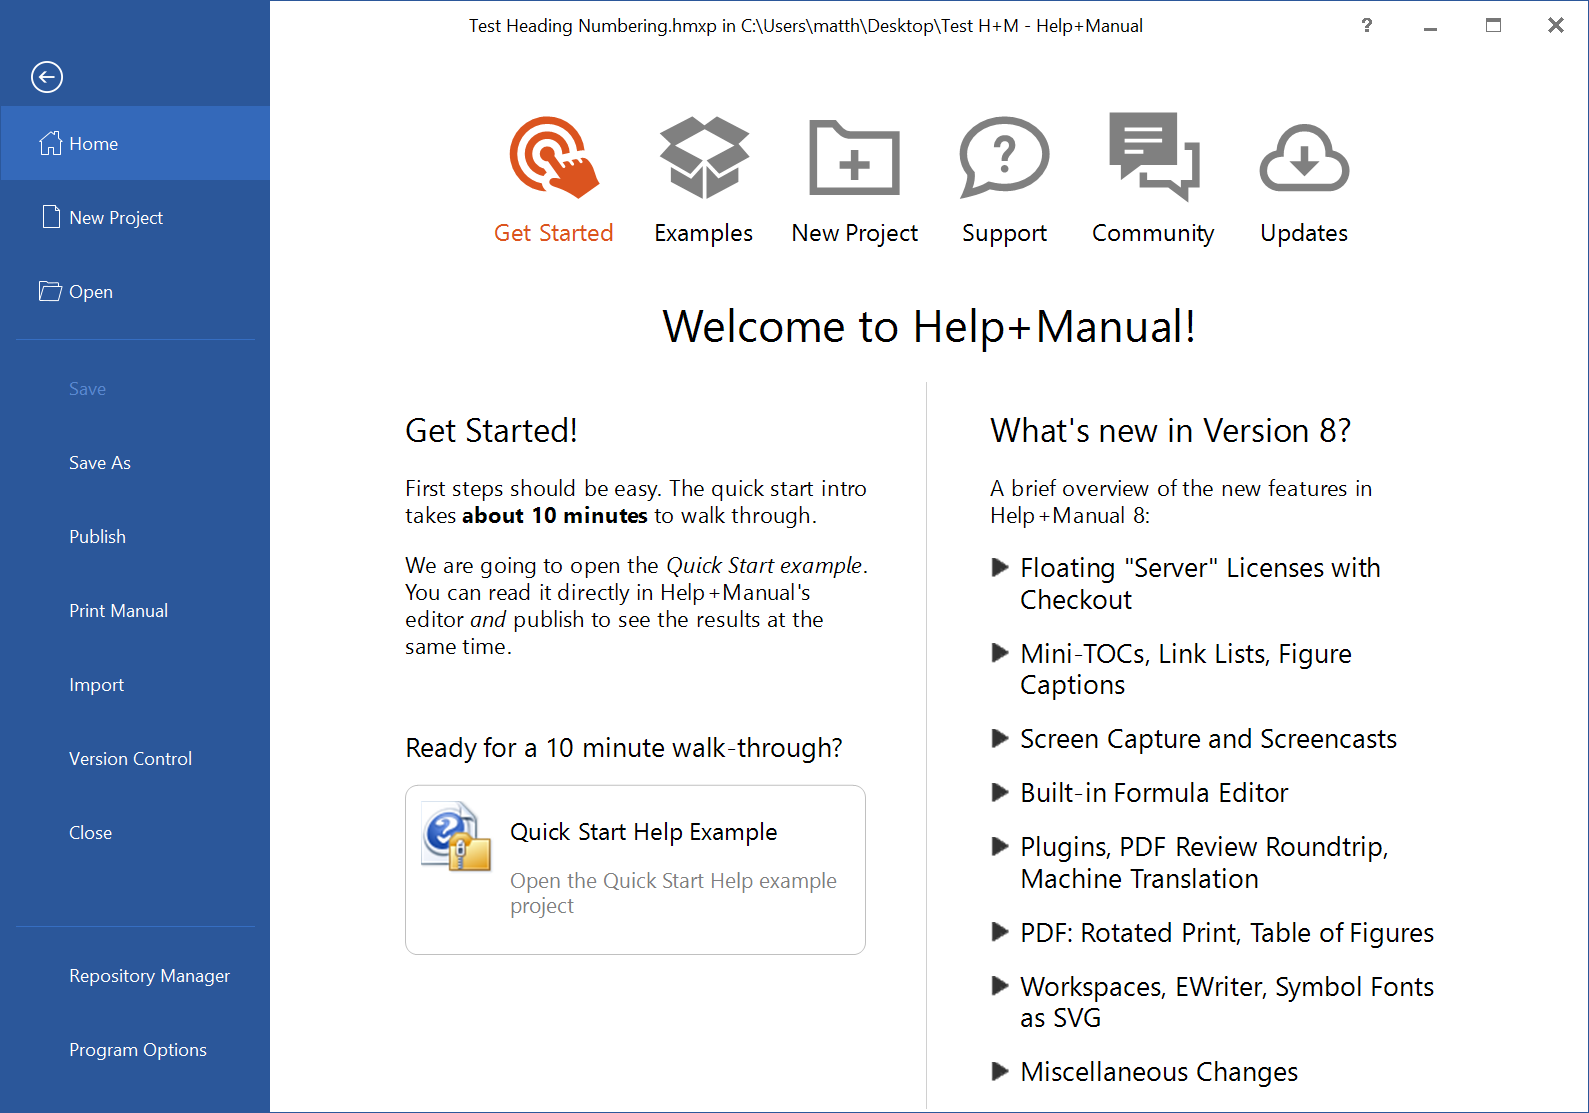 Screenshot showing the Help+Manual 8 Home page